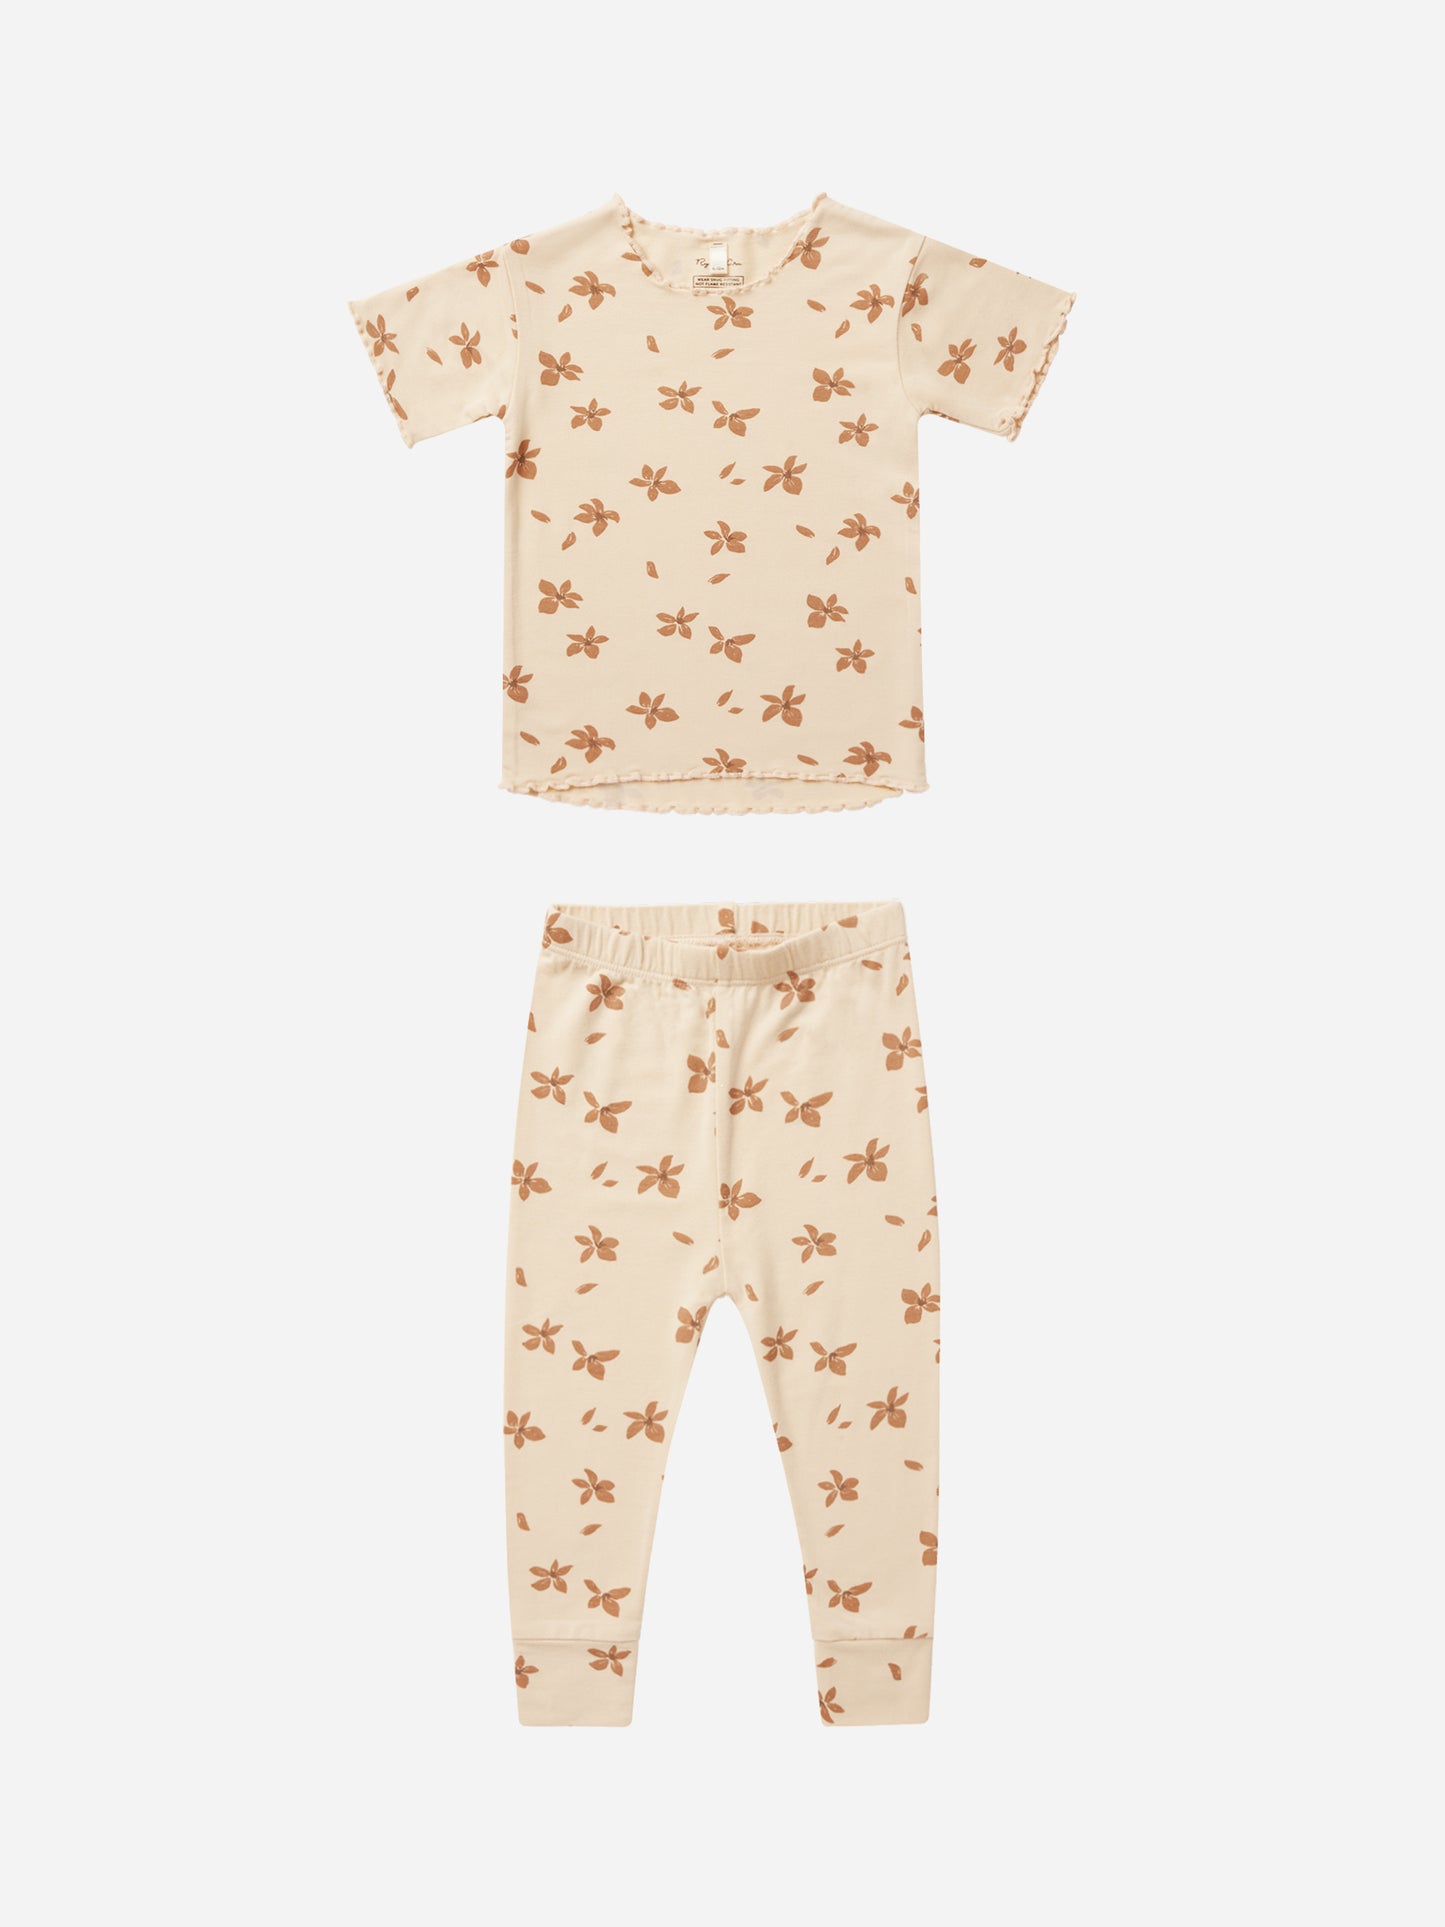 Summer Pj Set || Scatter - Rylee + Cru | Kids Clothes | Trendy Baby Clothes | Modern Infant Outfits |